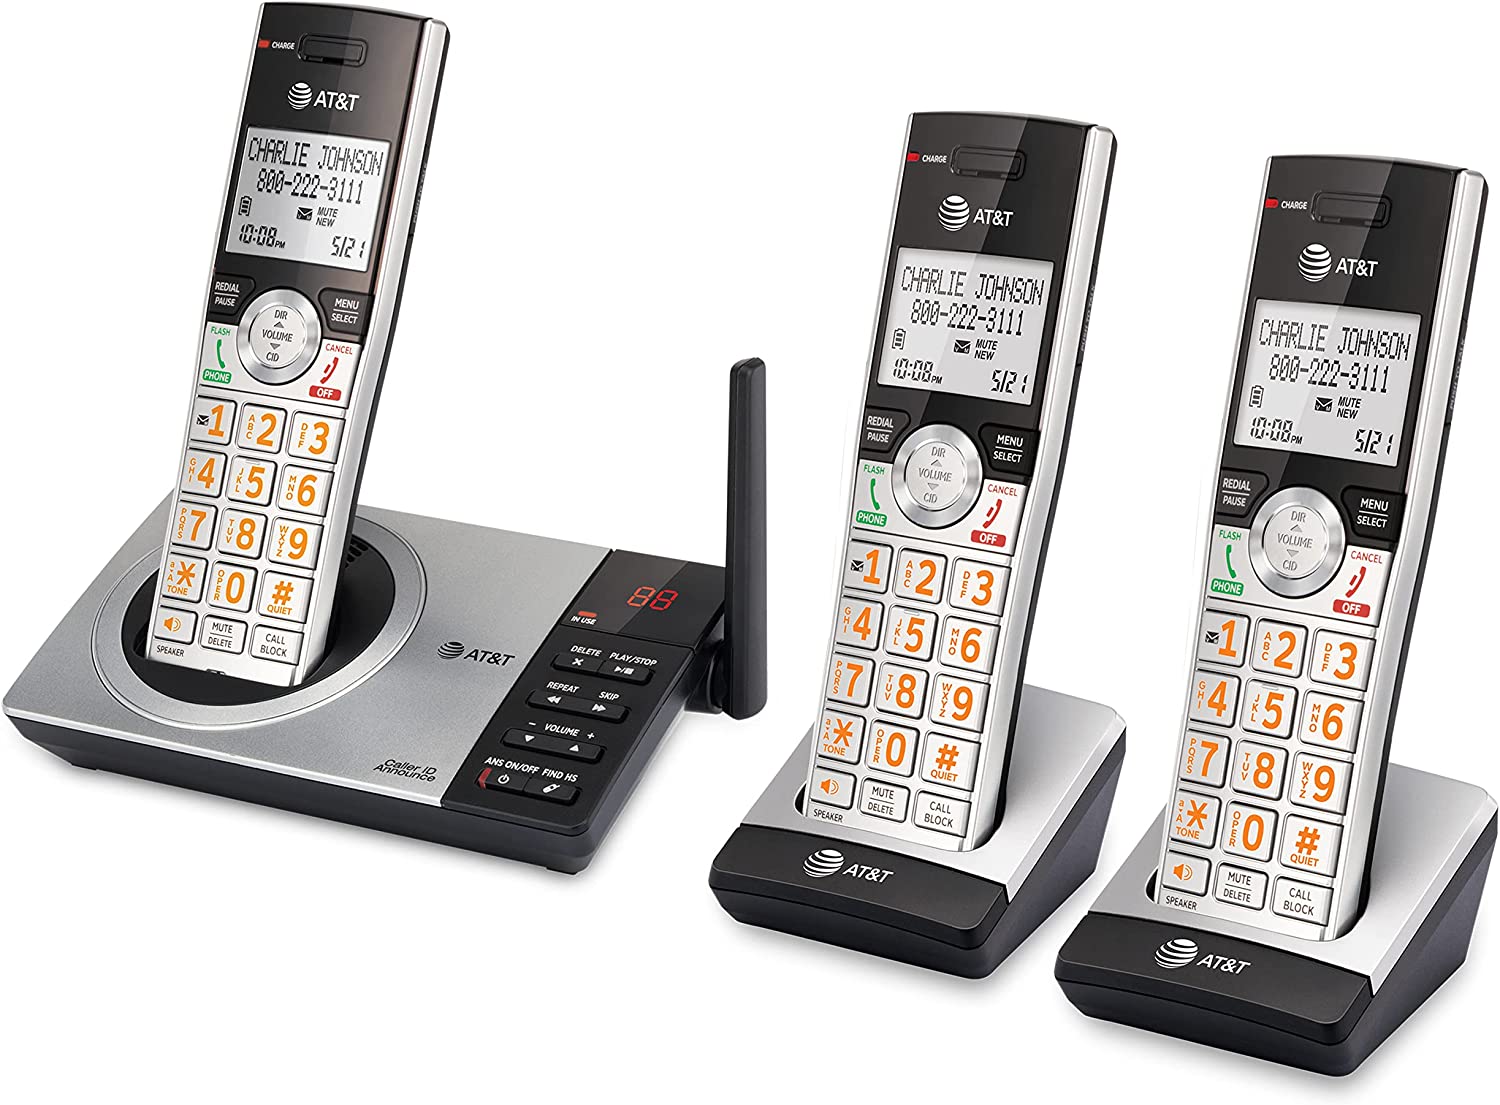 AT&T DECT 6.0 Expandable Cordless Phone with Answering System, Silver/Black with 3 Handsets - image 4 of 10